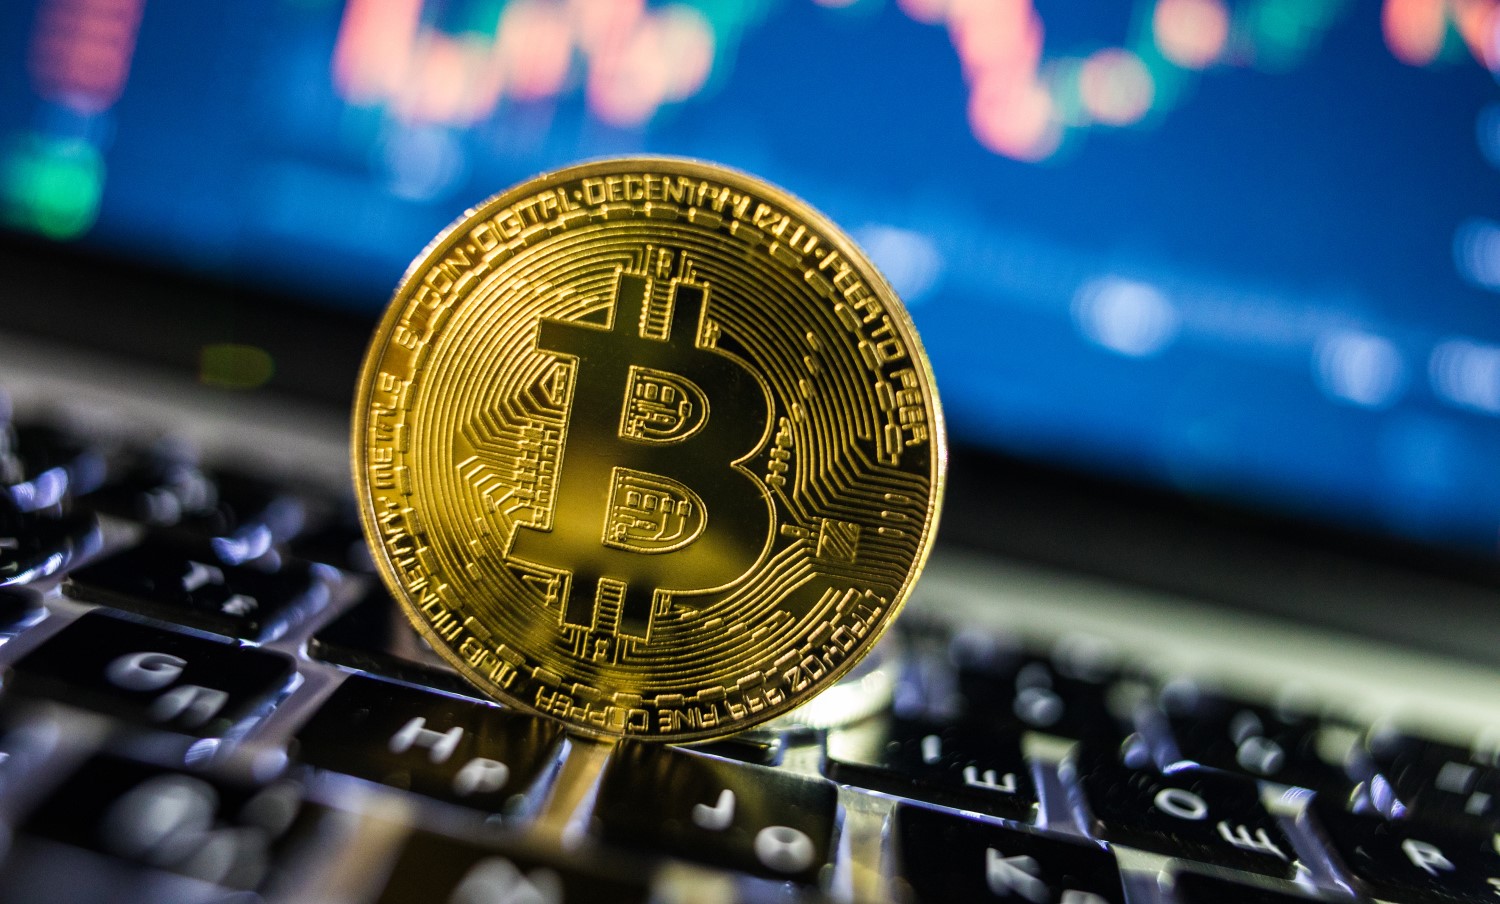 Bitcoin is a growing phenomenon. Learn how to evaluate Bitcoin cryptocurrency trading here.